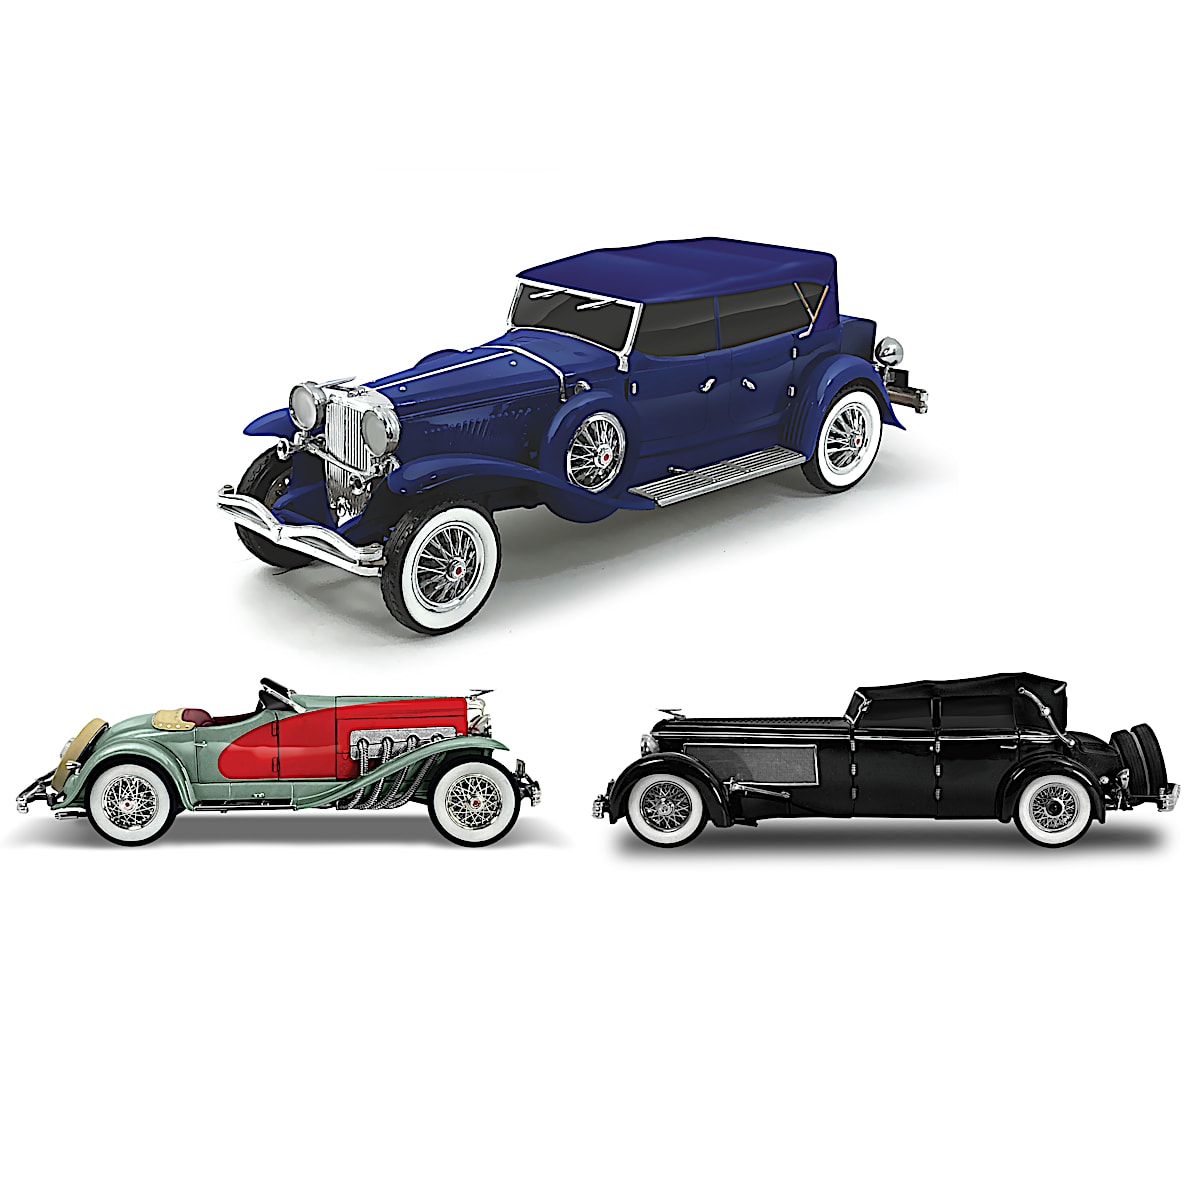 The Best In Show Duesenberg 1:24-Scale Sculpture Collection Featuring A ...